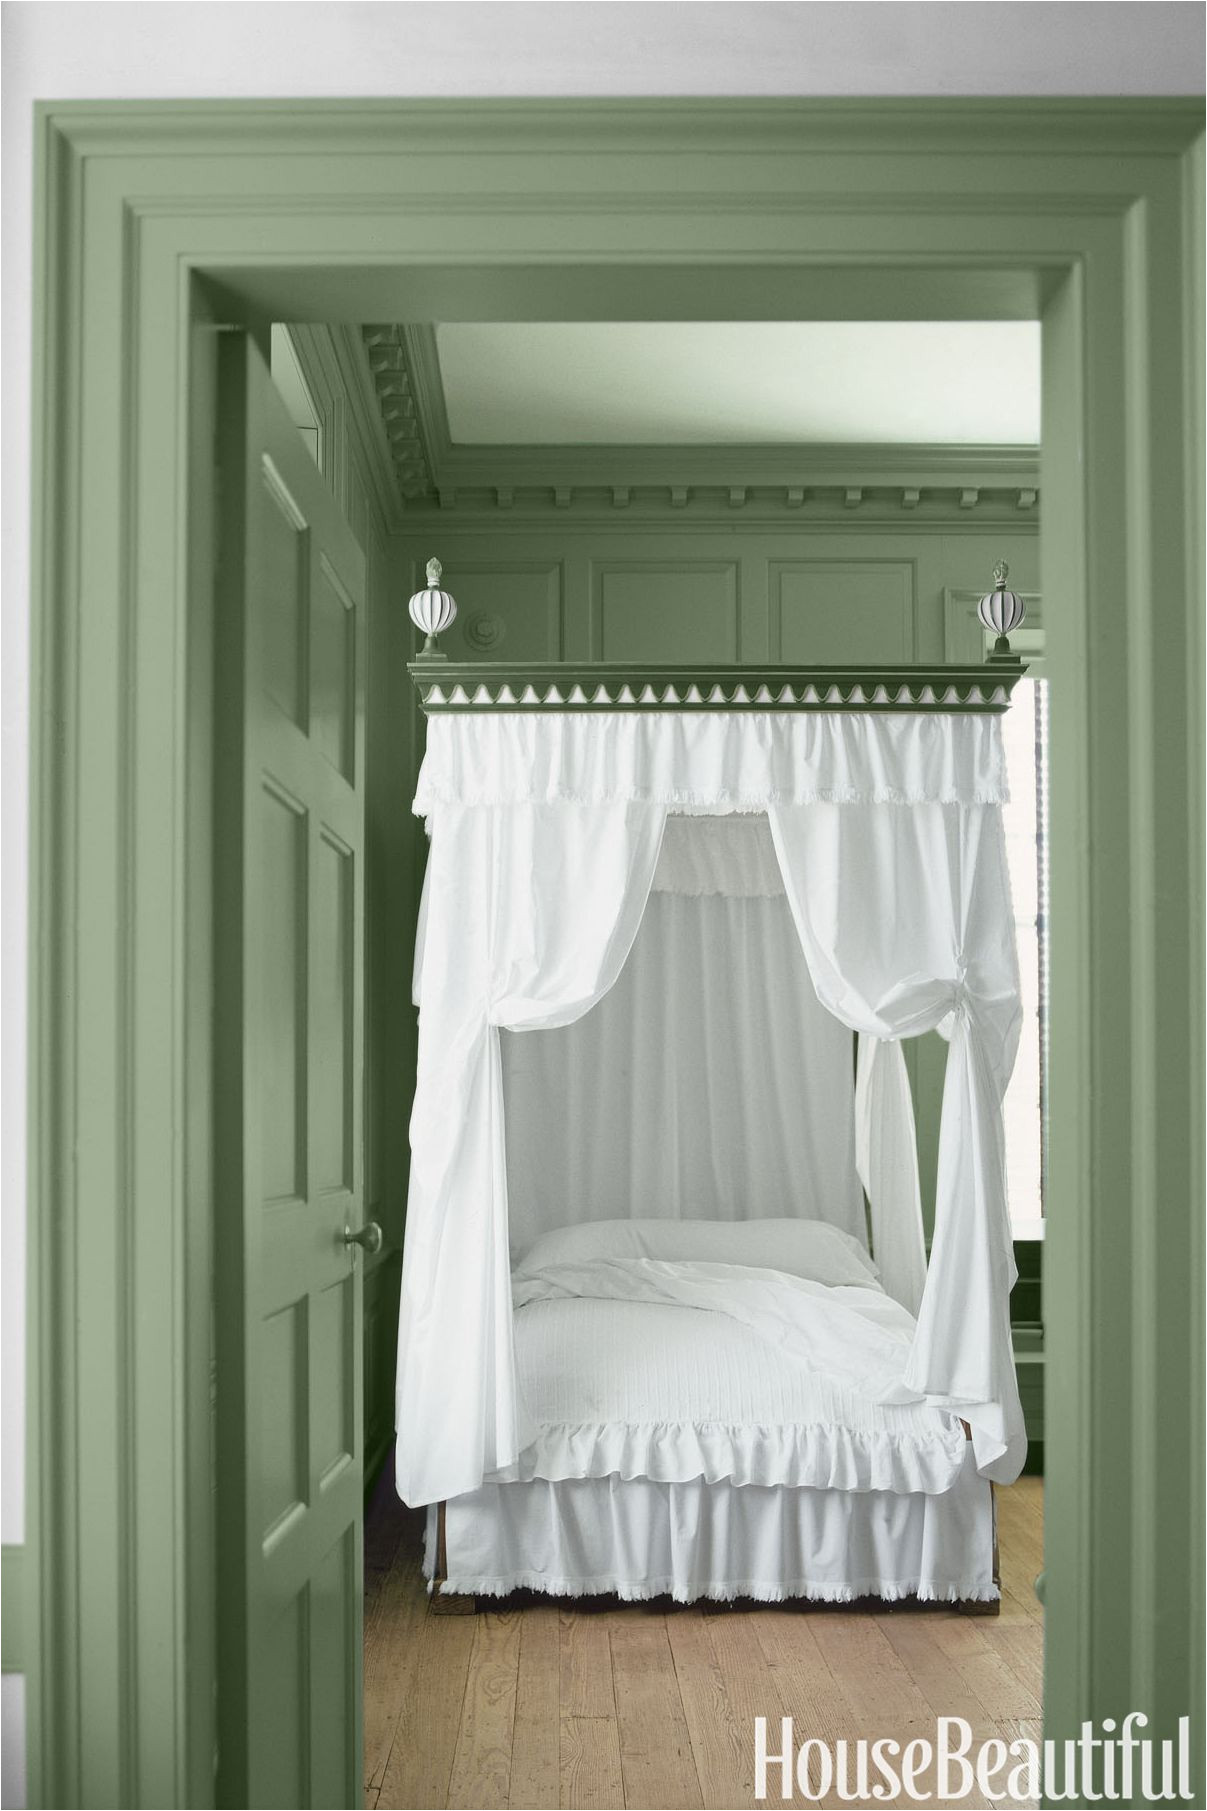 10 sage green paint colors that bring peace and calm best sage green paint colors